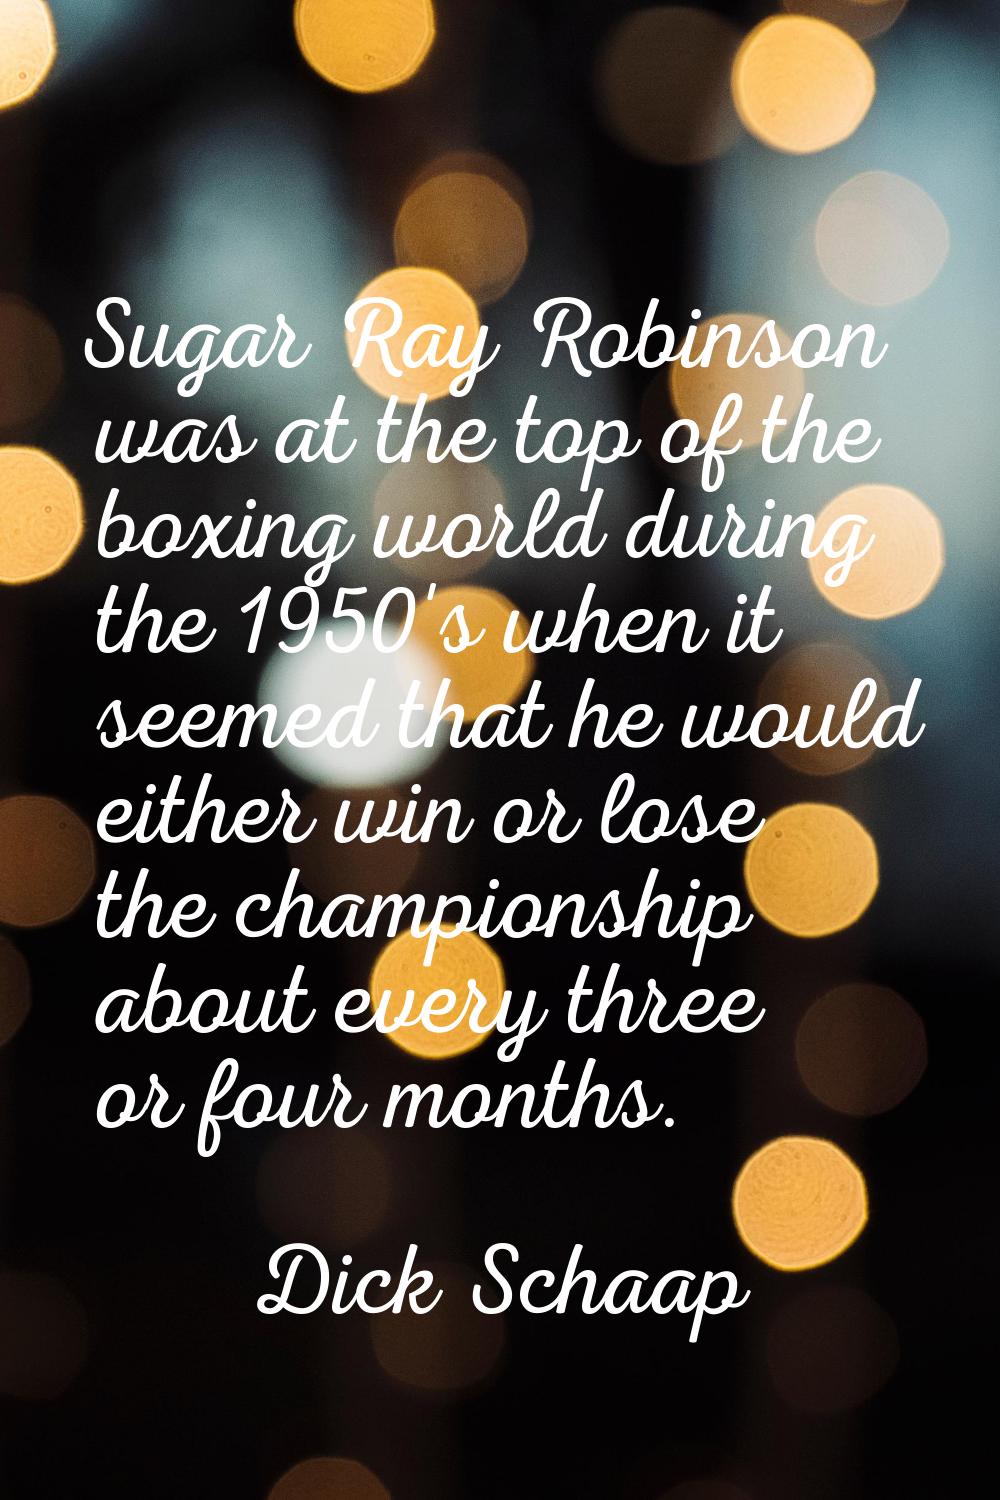 Sugar Ray Robinson was at the top of the boxing world during the 1950's when it seemed that he woul